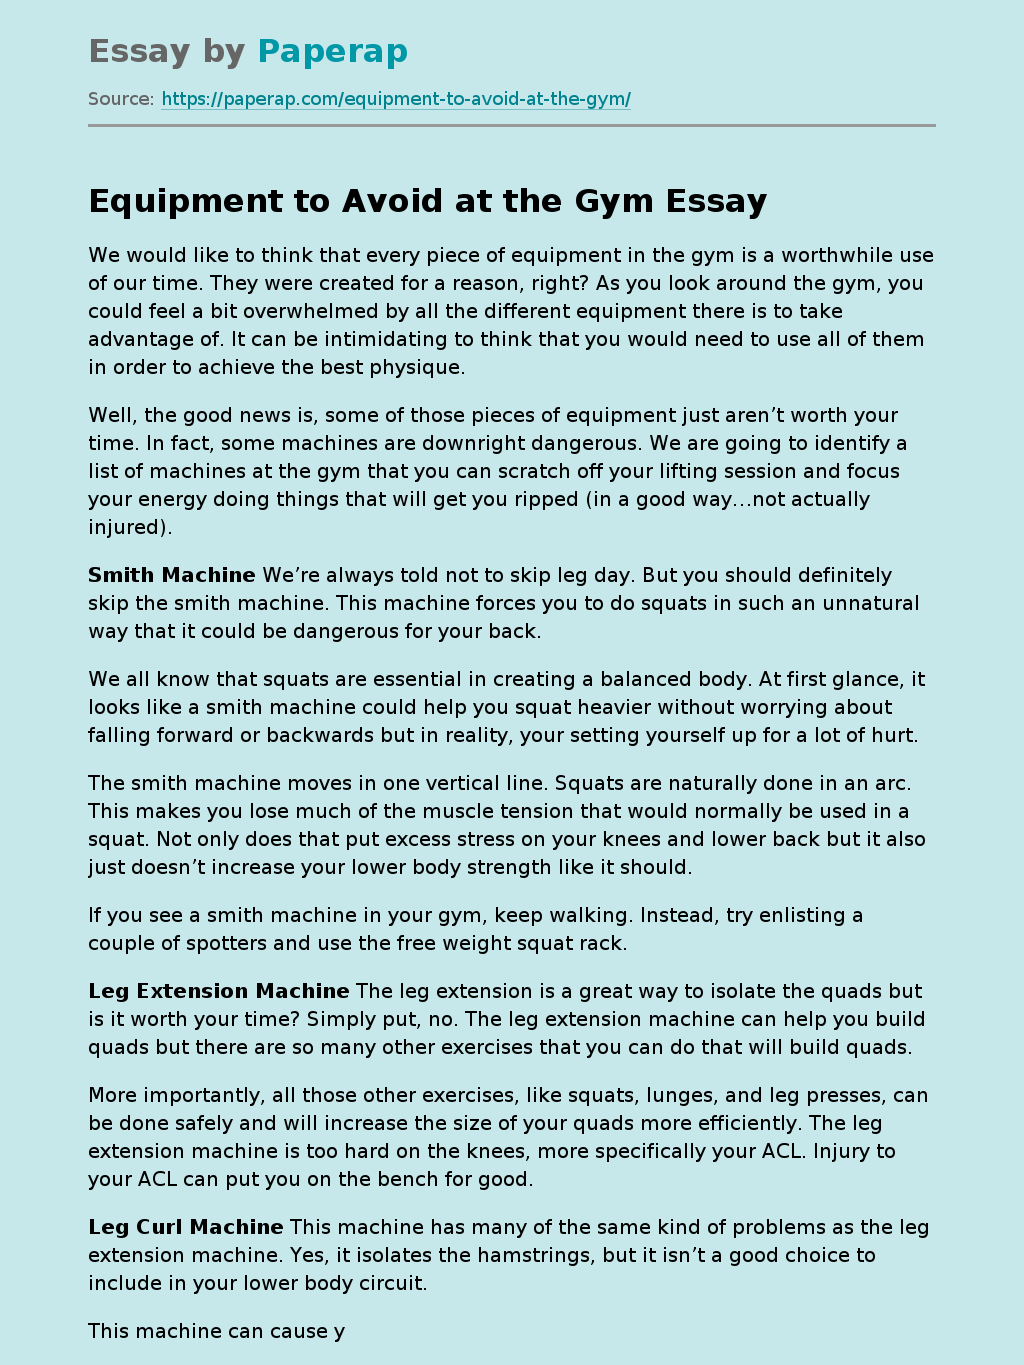 Equipment to Avoid at the Gym